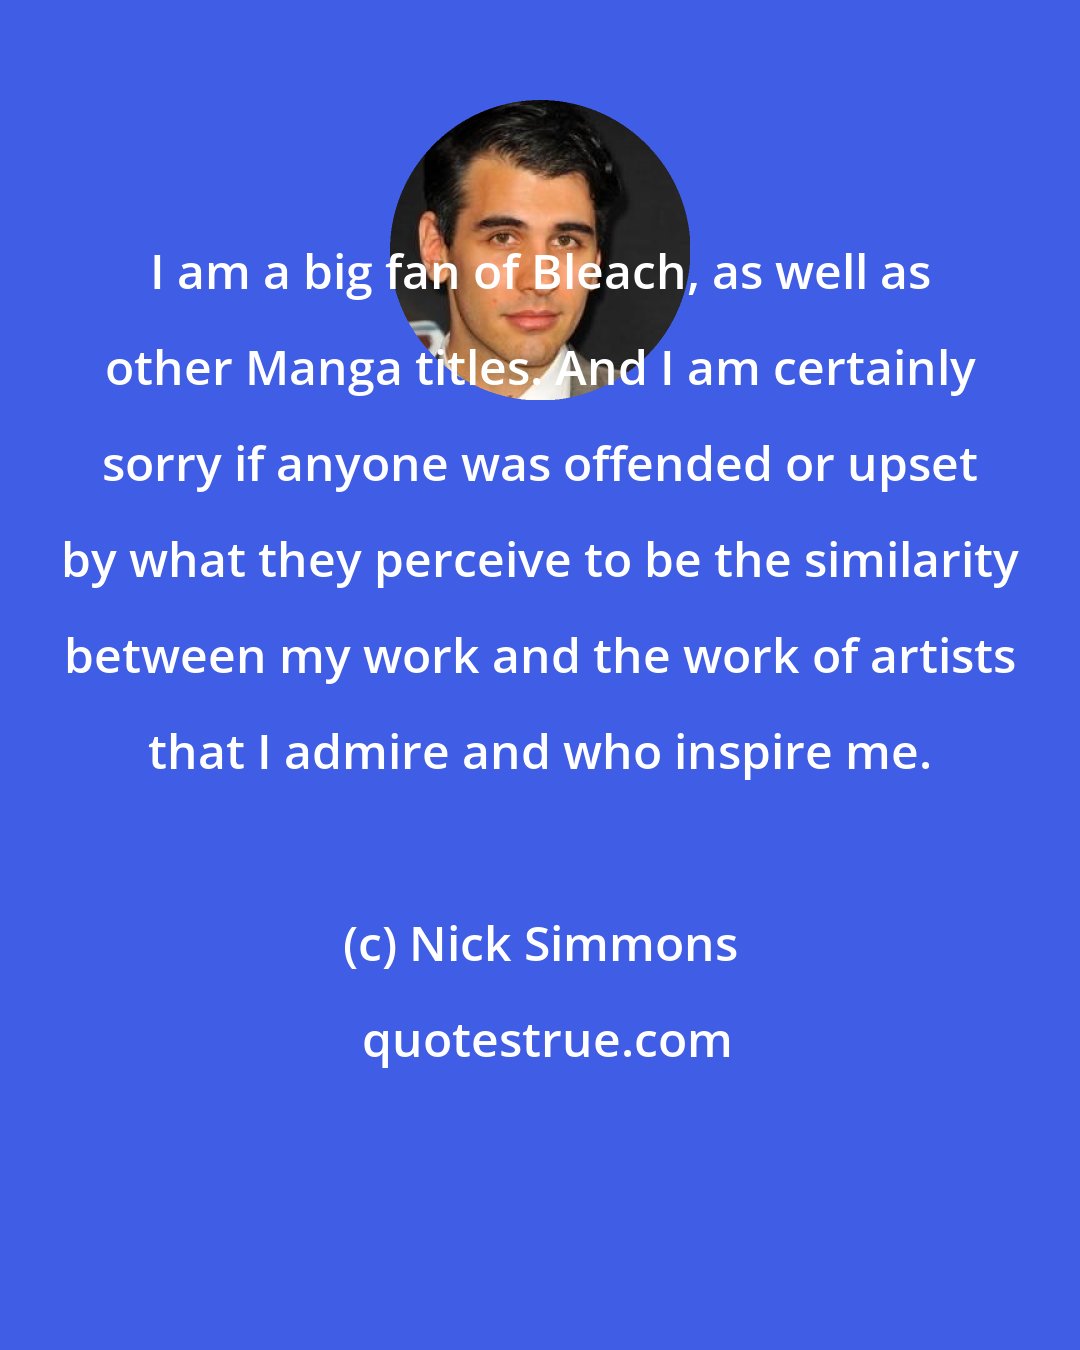 Nick Simmons: I am a big fan of Bleach, as well as other Manga titles. And I am certainly sorry if anyone was offended or upset by what they perceive to be the similarity between my work and the work of artists that I admire and who inspire me.